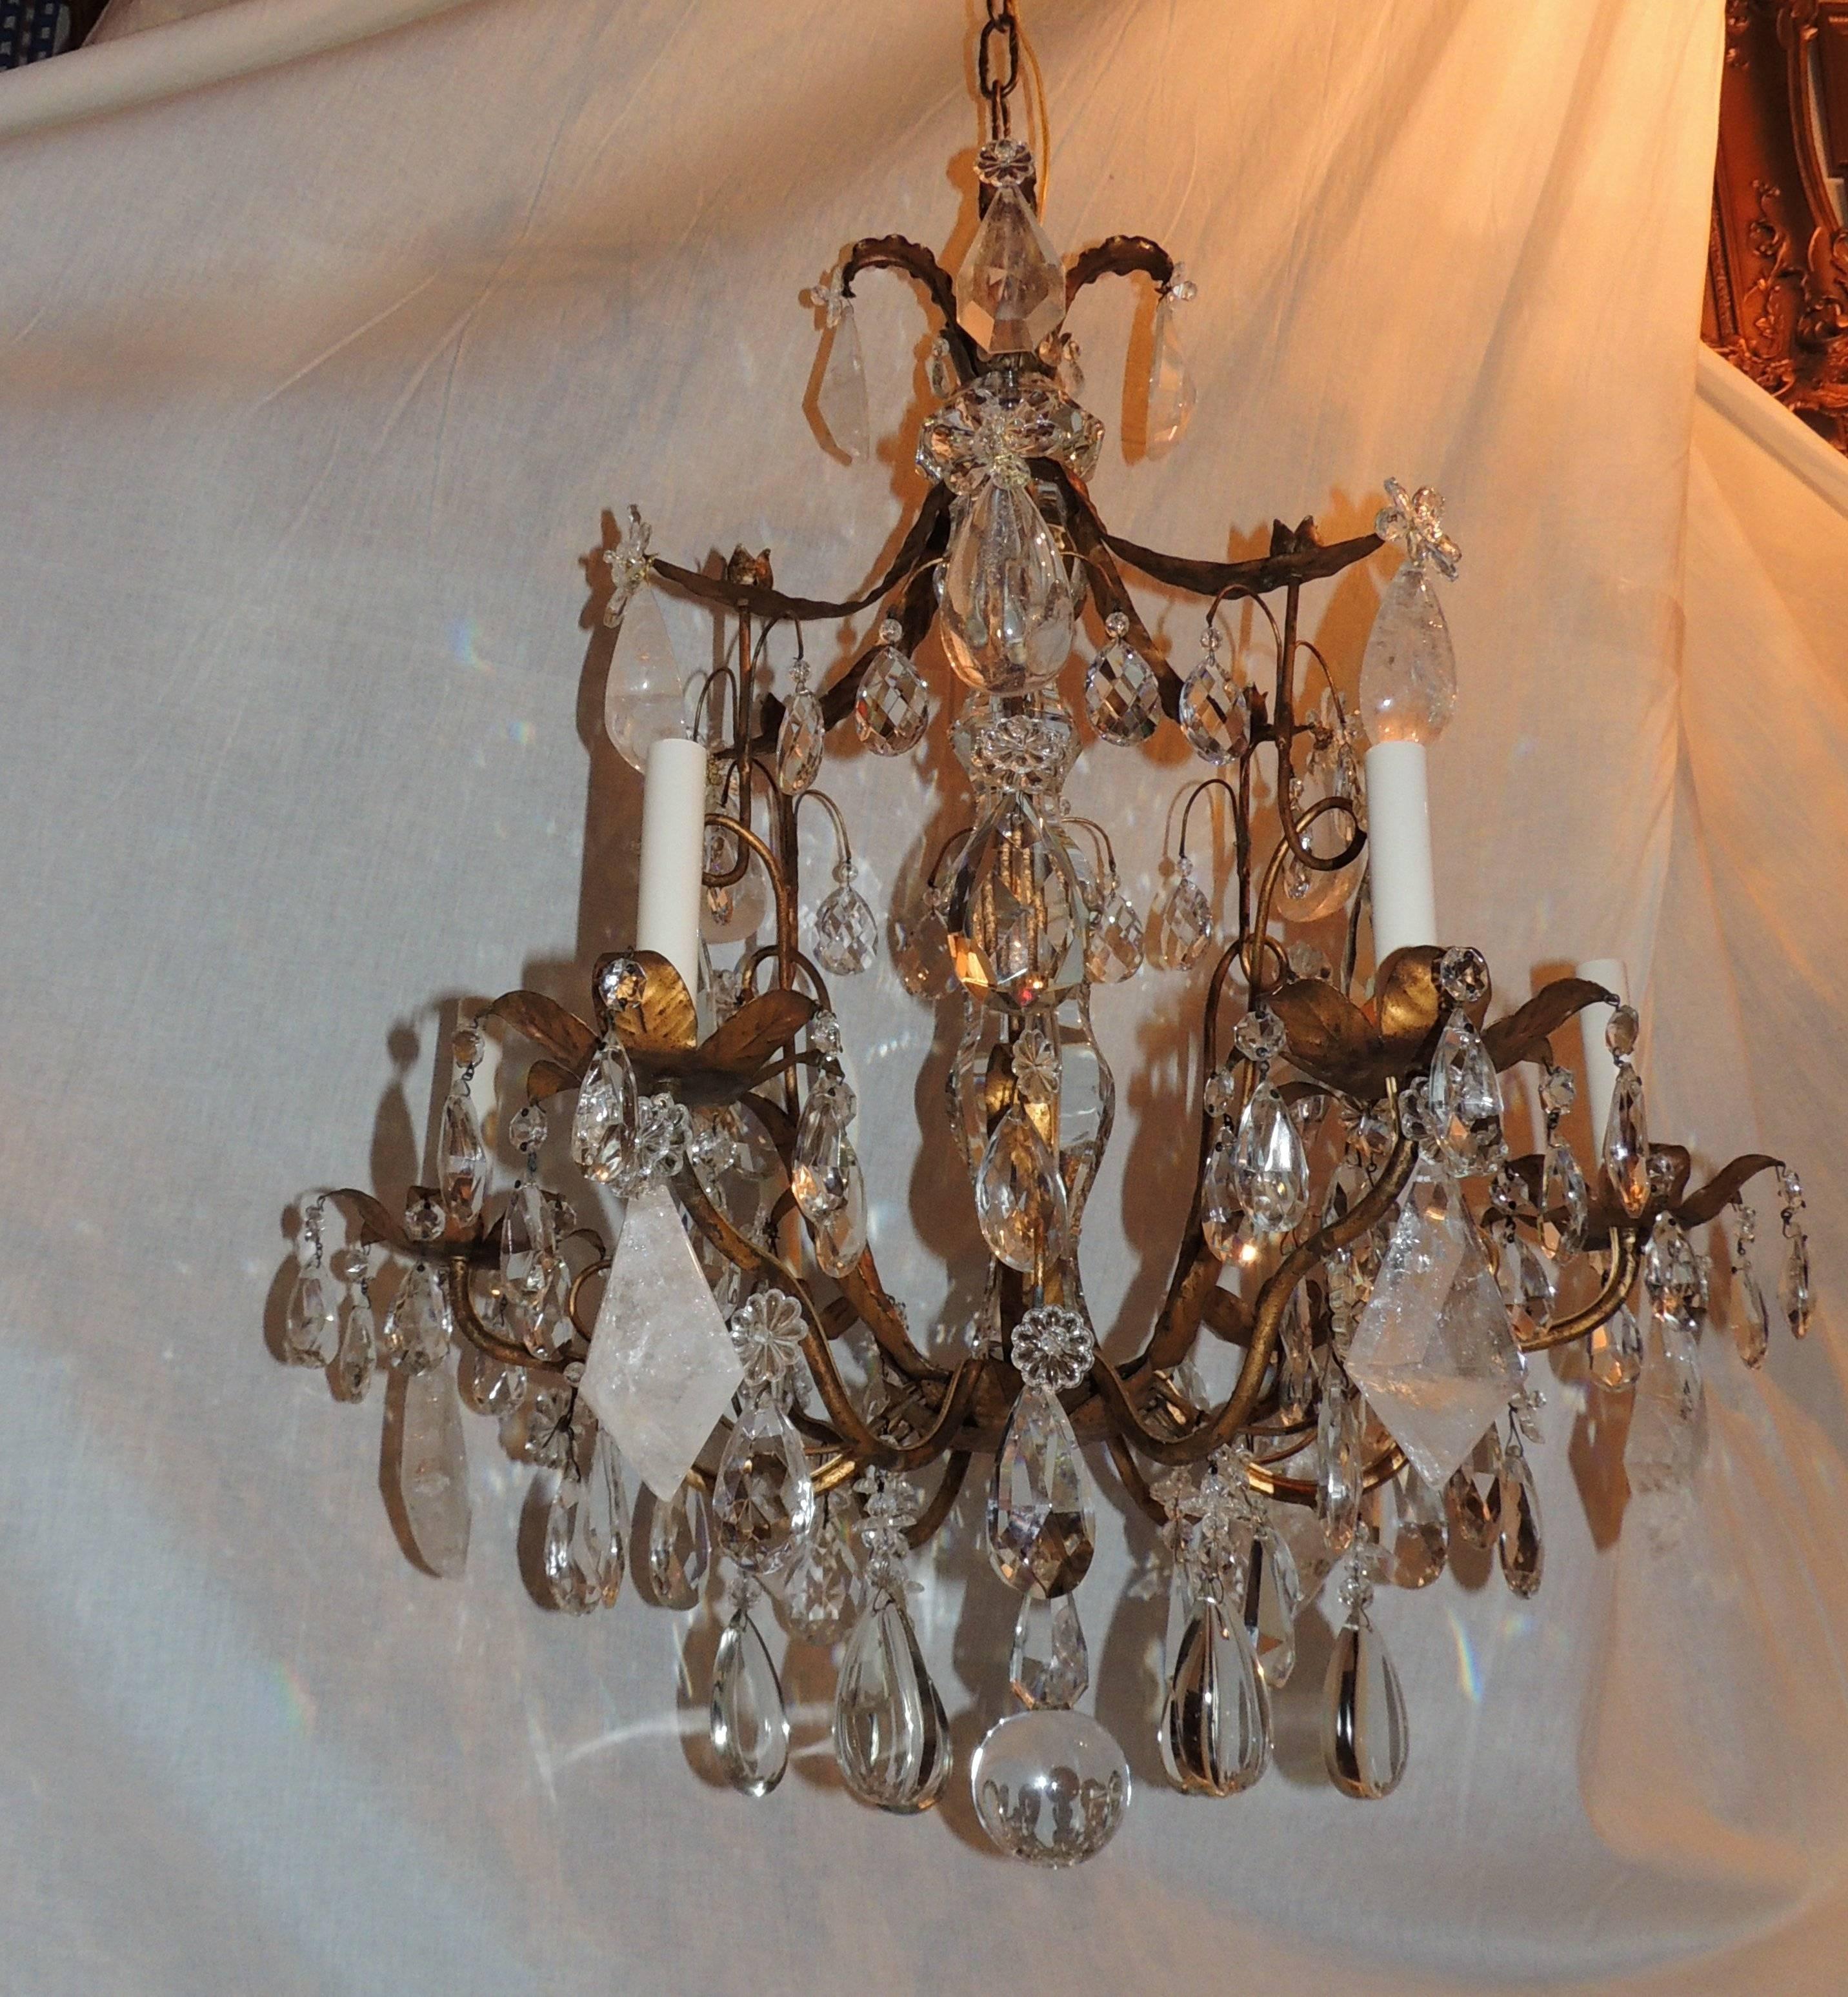 Doré bronze leaves accent the Pagoda shape of this Bagues style chandelier with rock crystal and crystal throughout.

Measures: 32" H x 25" W.